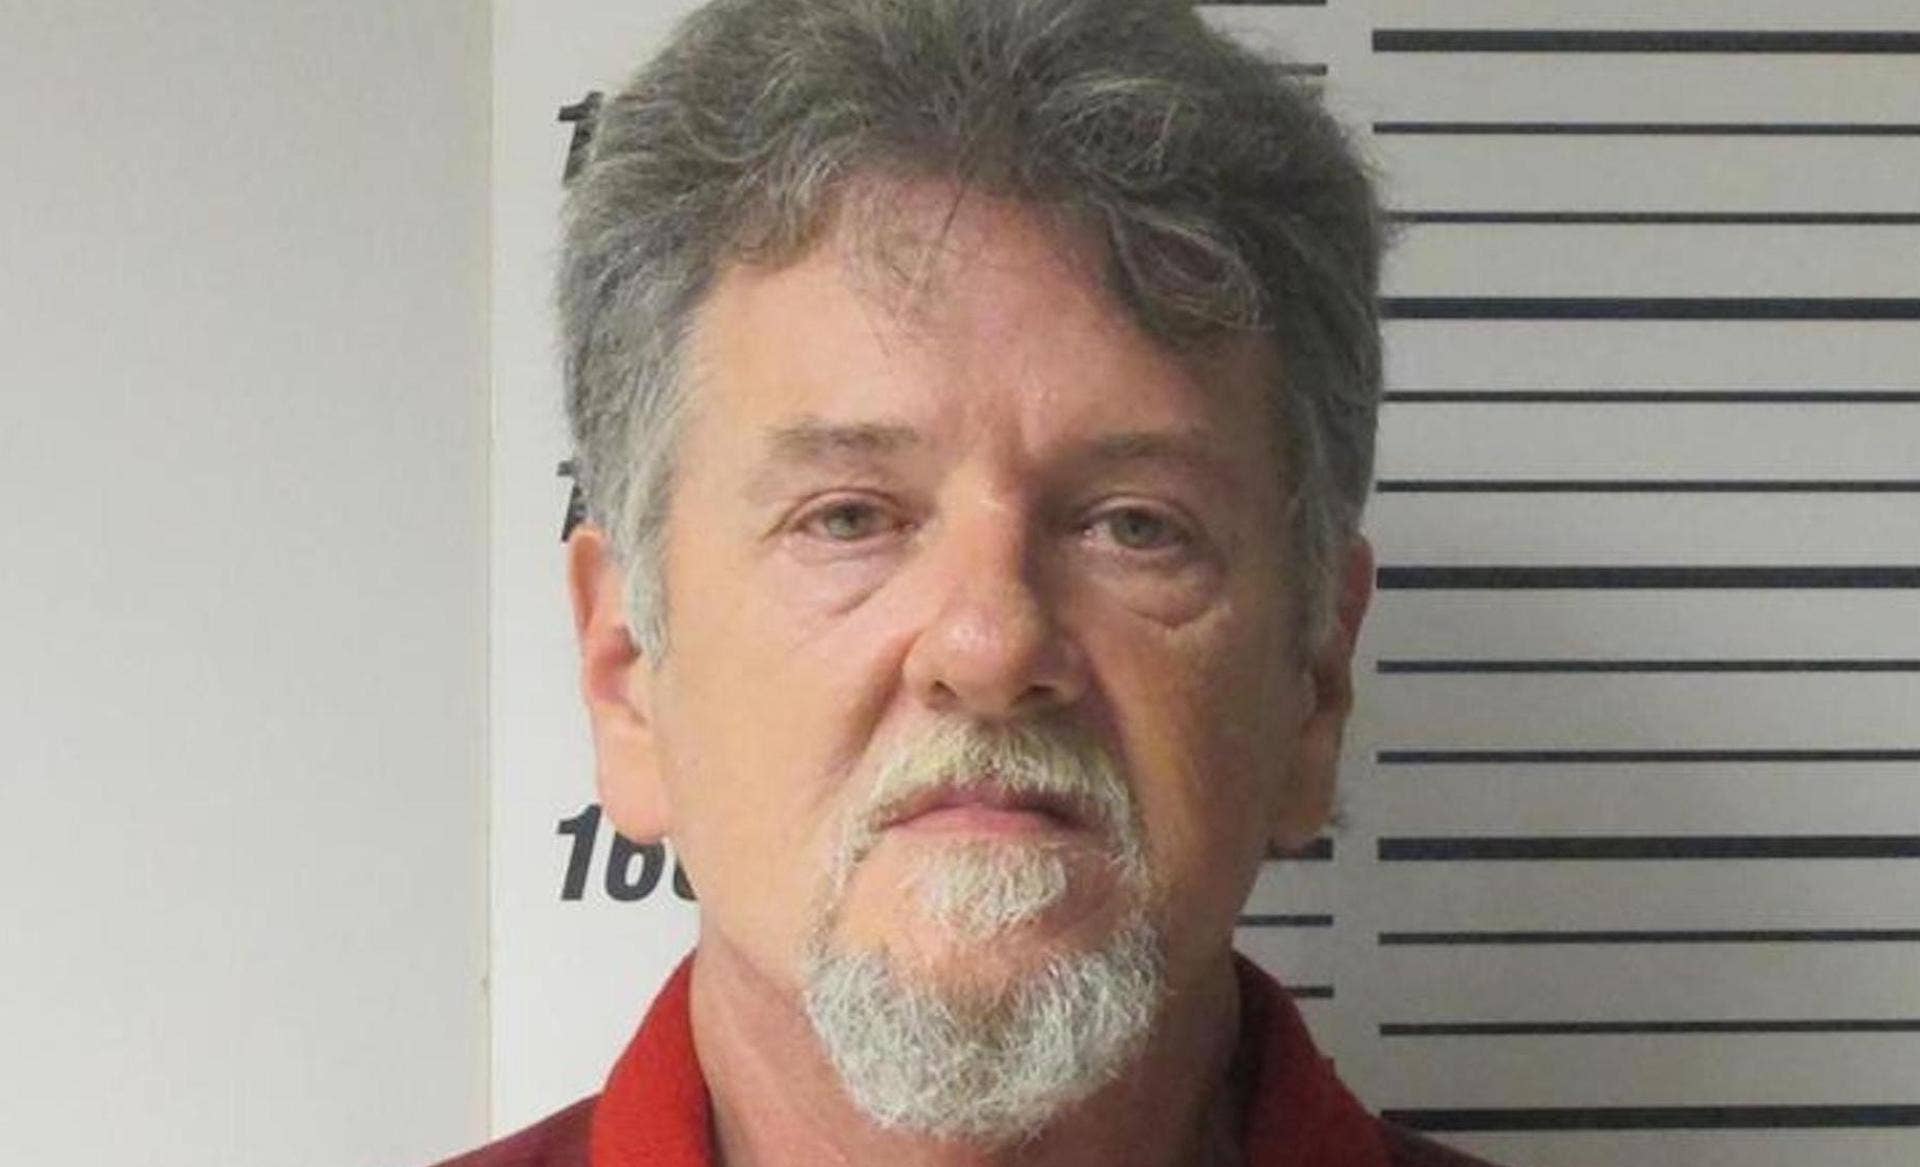 Missouri man sentenced to 25 years in prison after storing wife's dead body in freezer